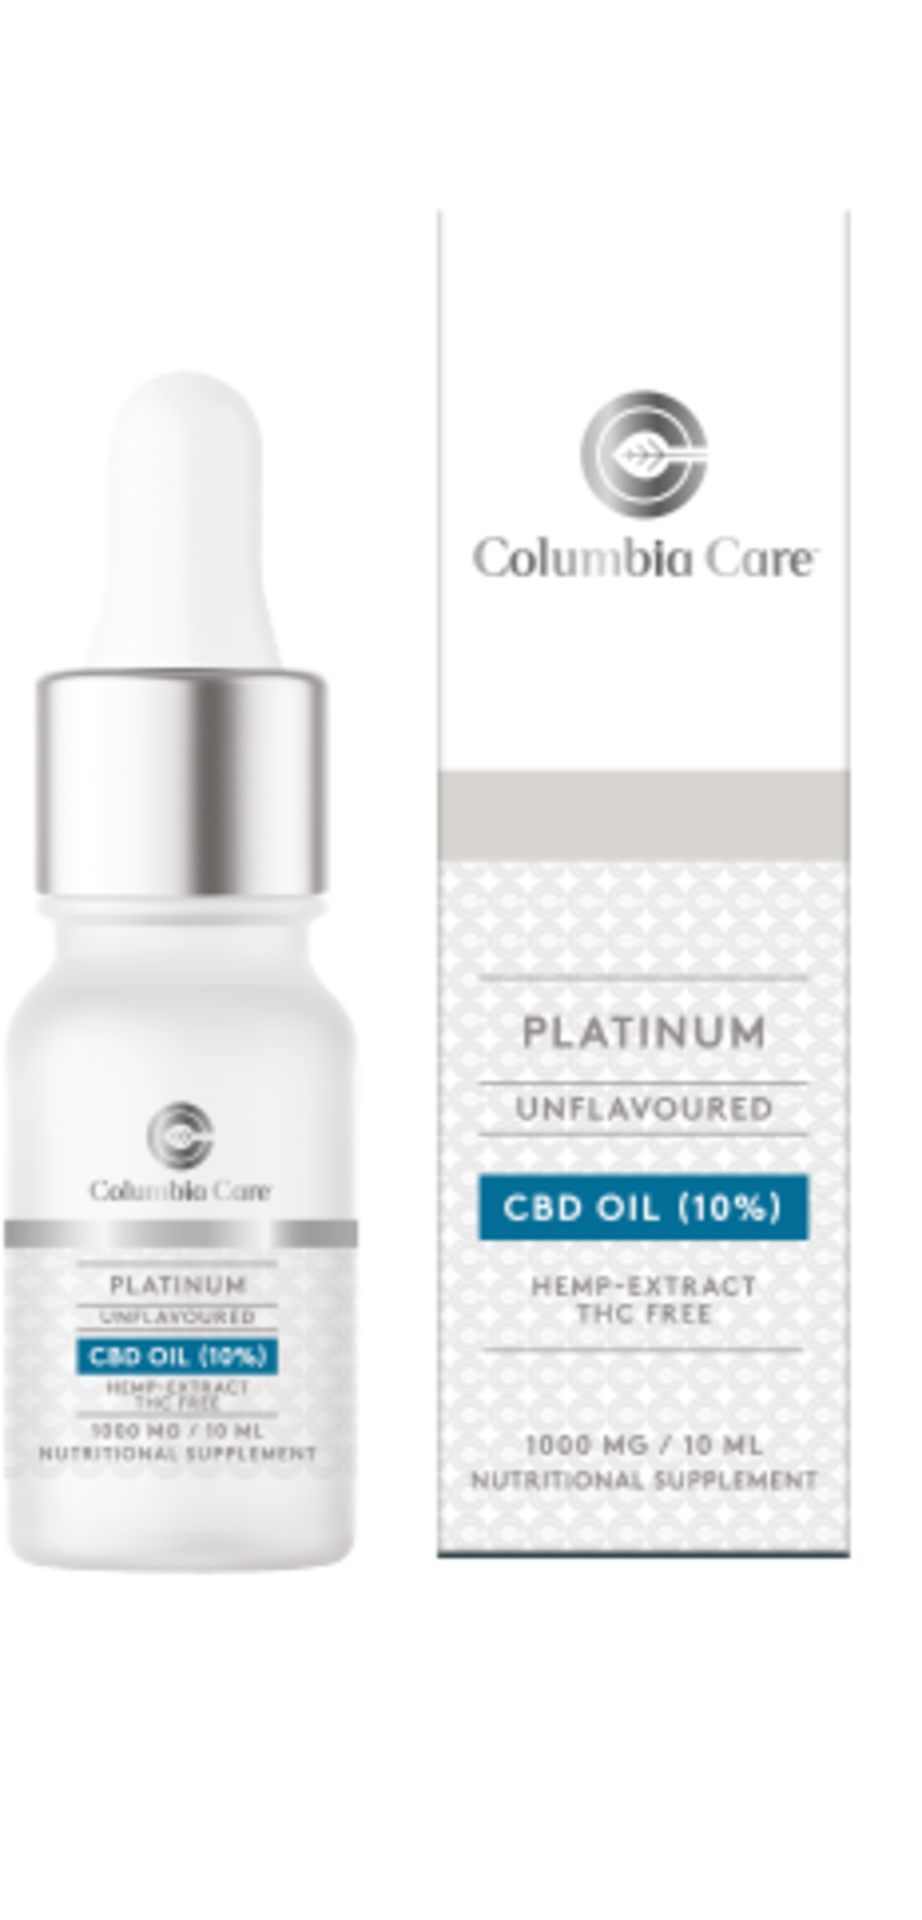 5 x Brand New Columbia Care Platinum Unflavoured Flavored Tincture 10ml 1000mg. Columbia Care, a